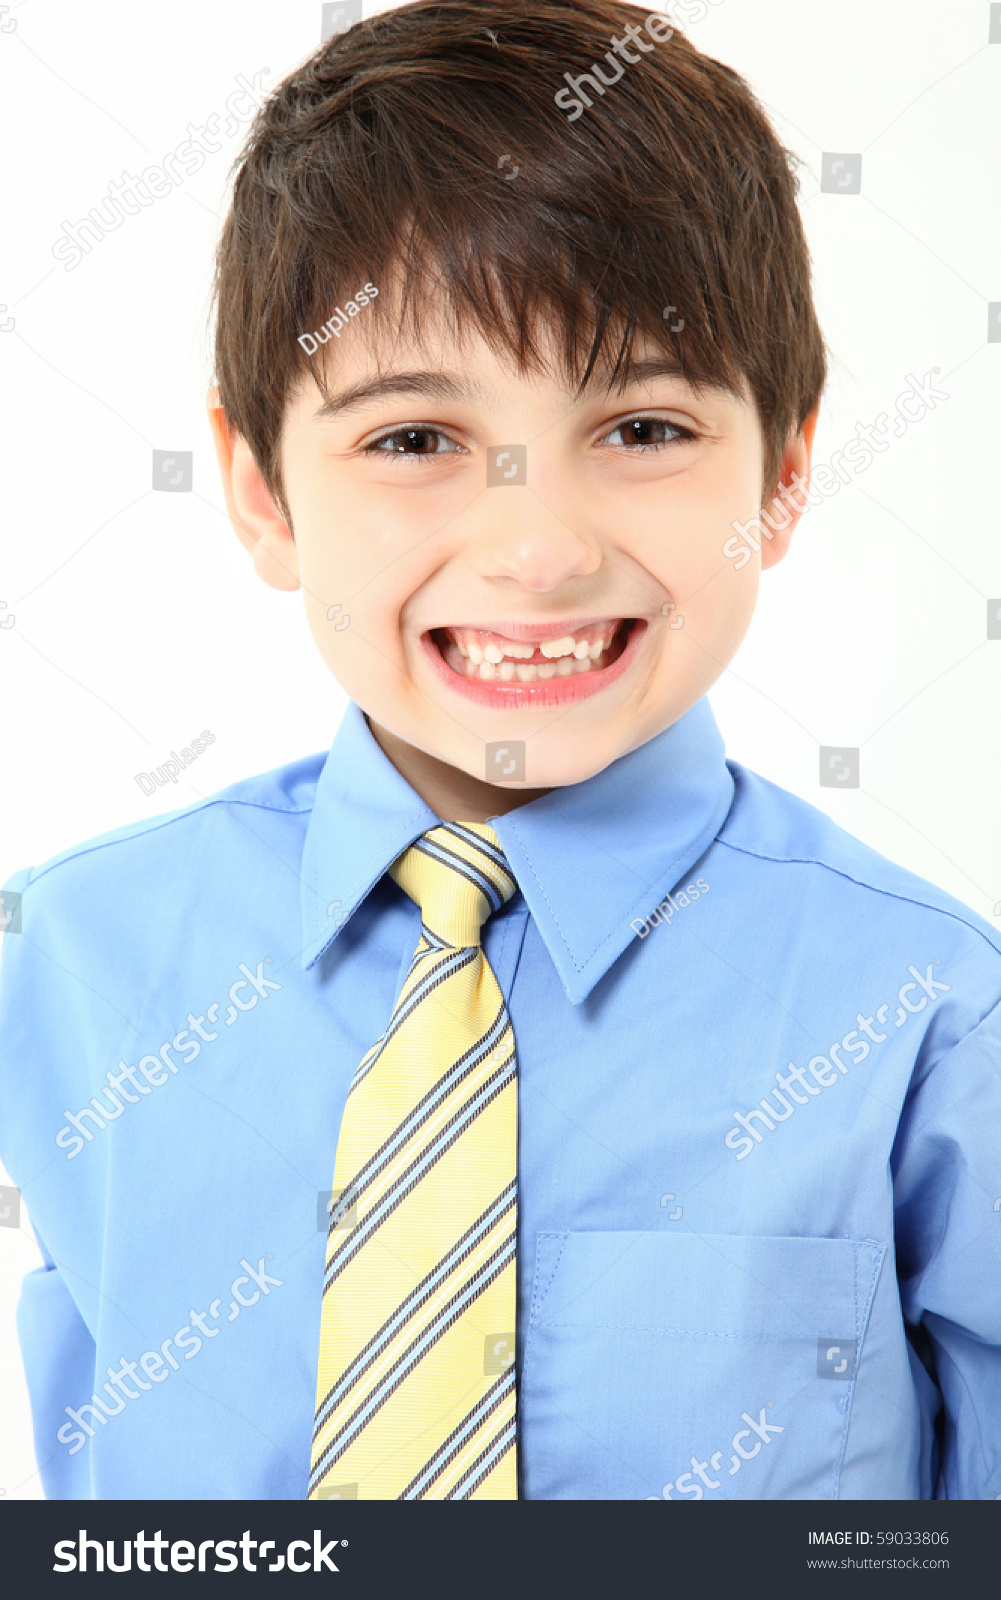 stock photo adorable year old french american boy close up in shirt and tie over white background 59033806